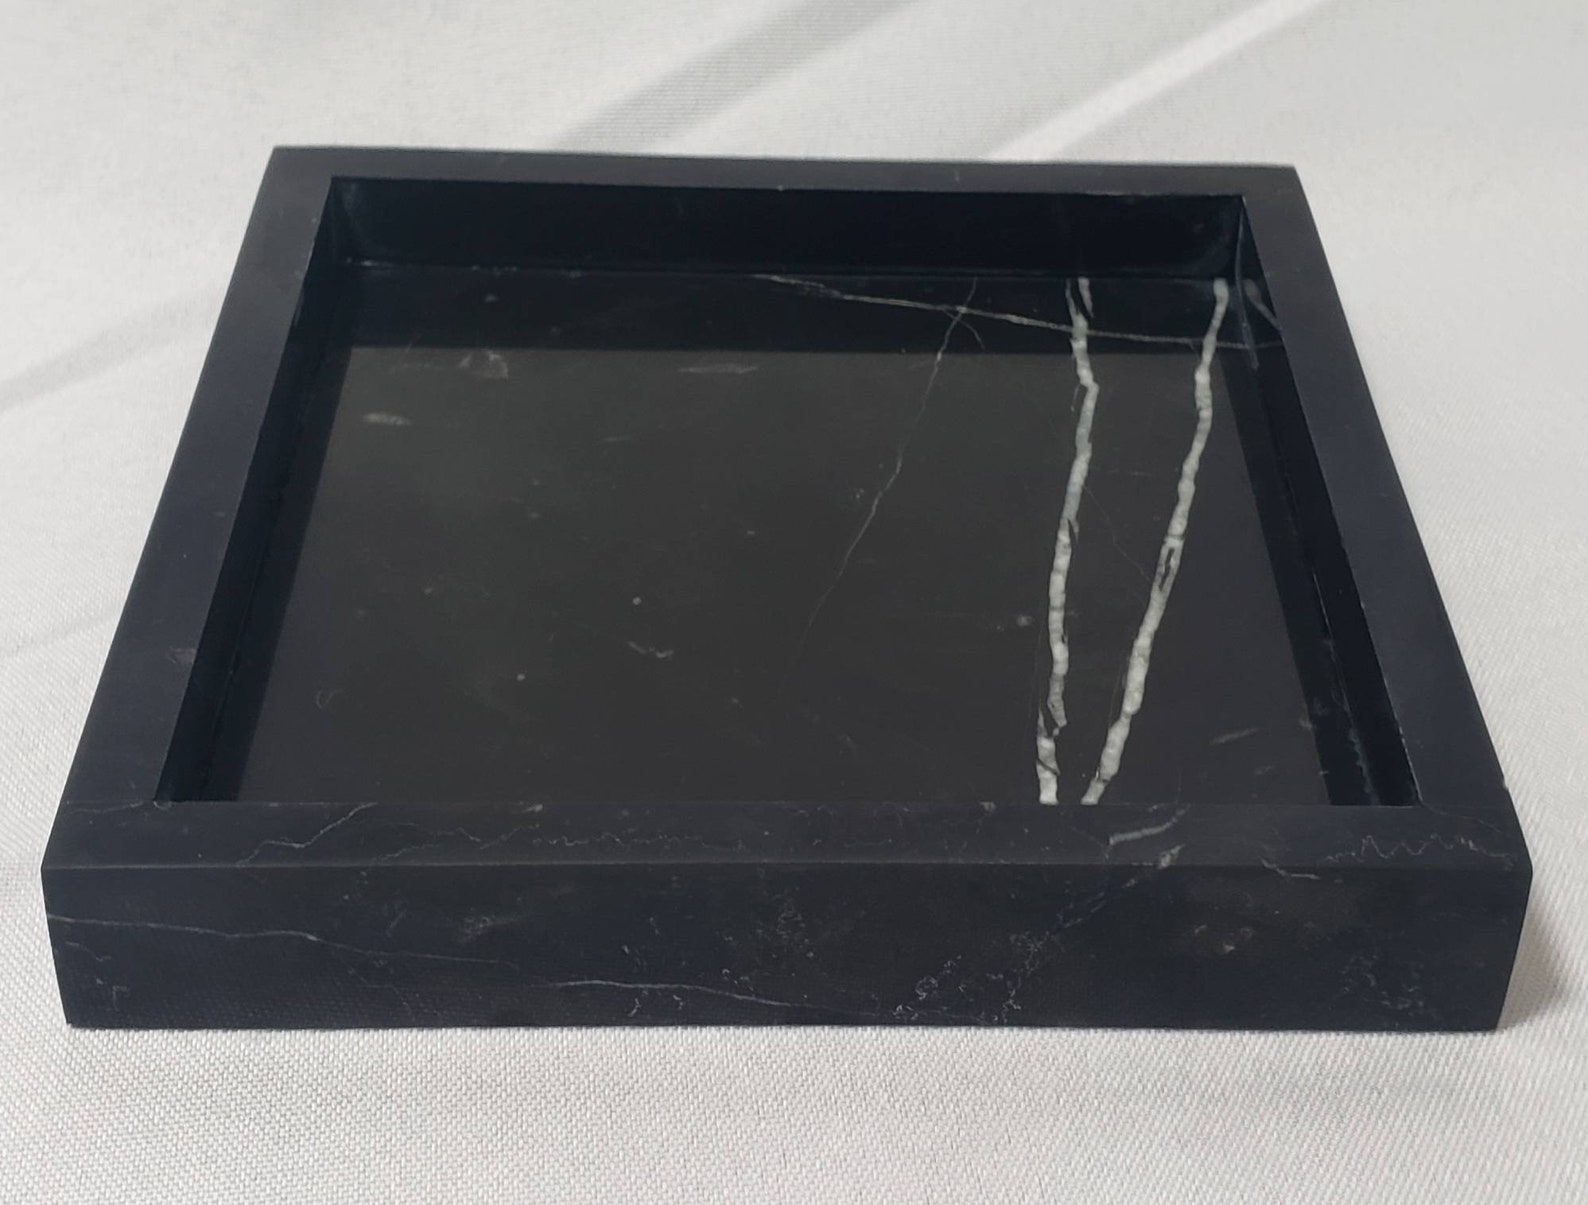 Nero Marquina Marble Tray in Your Choice of Sizes Perfect - Etsy